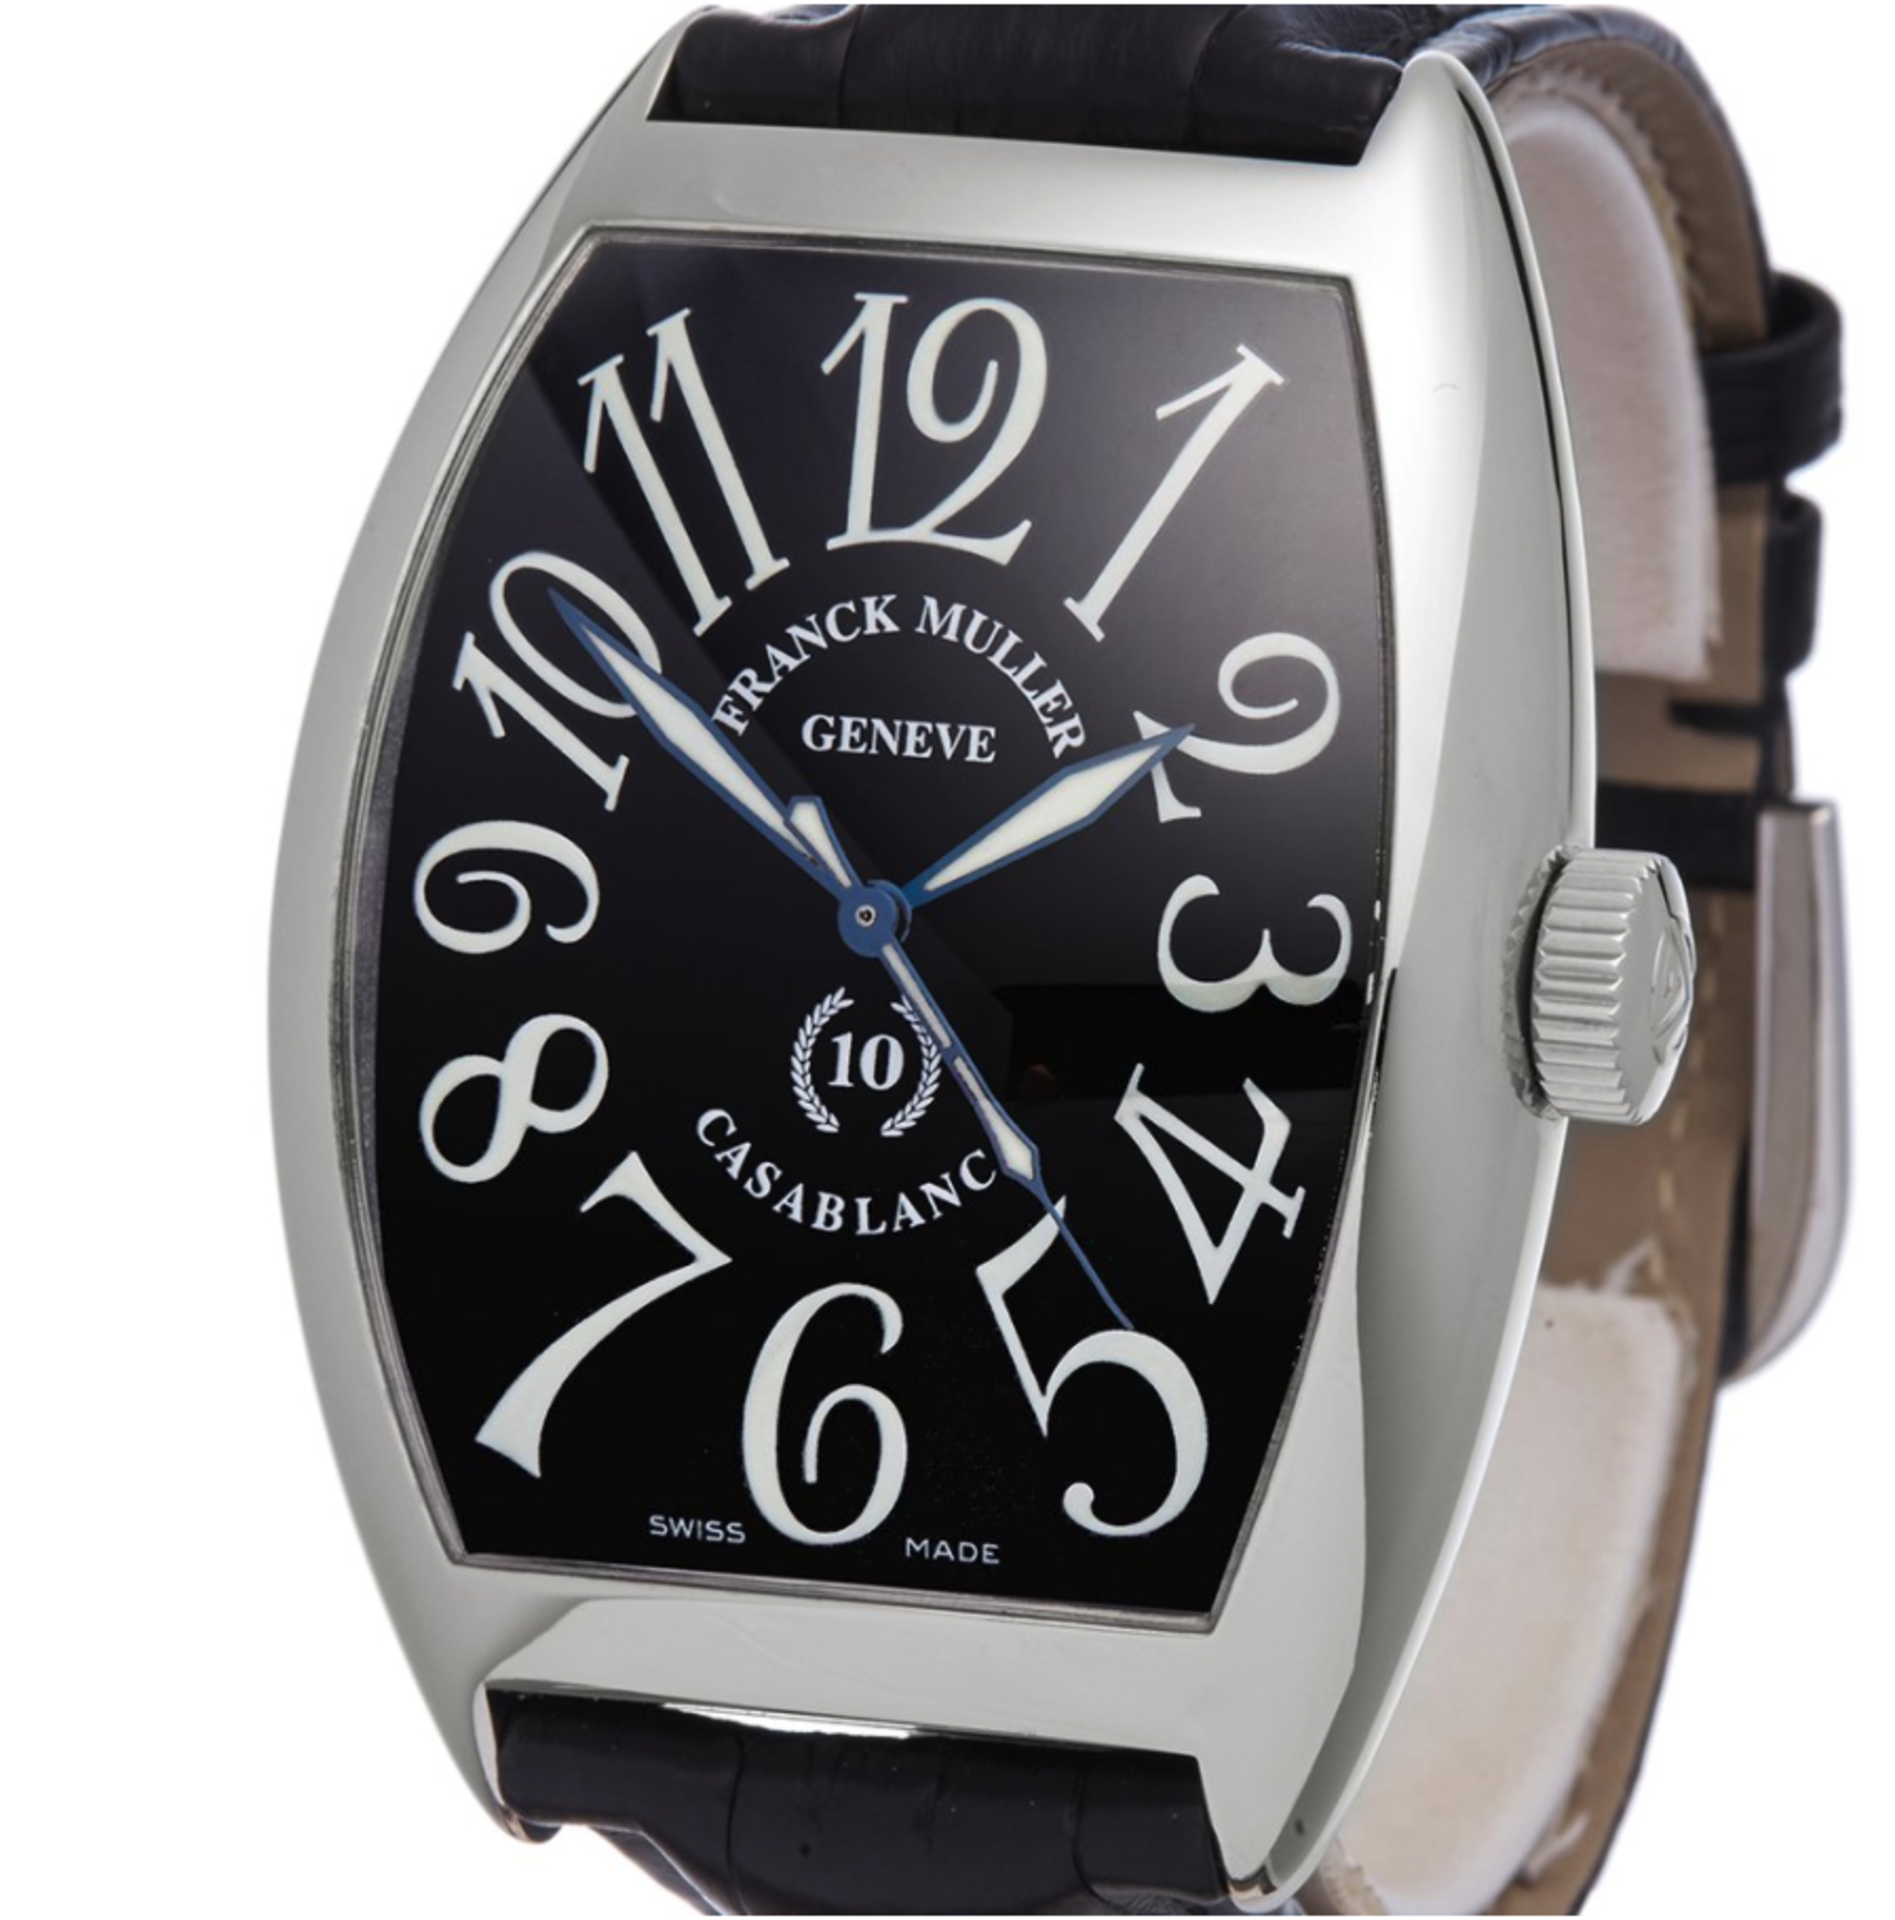 Franck Muller Casablanca 10th Anniversary Stainless Steel - 8880C - Image 6 of 8